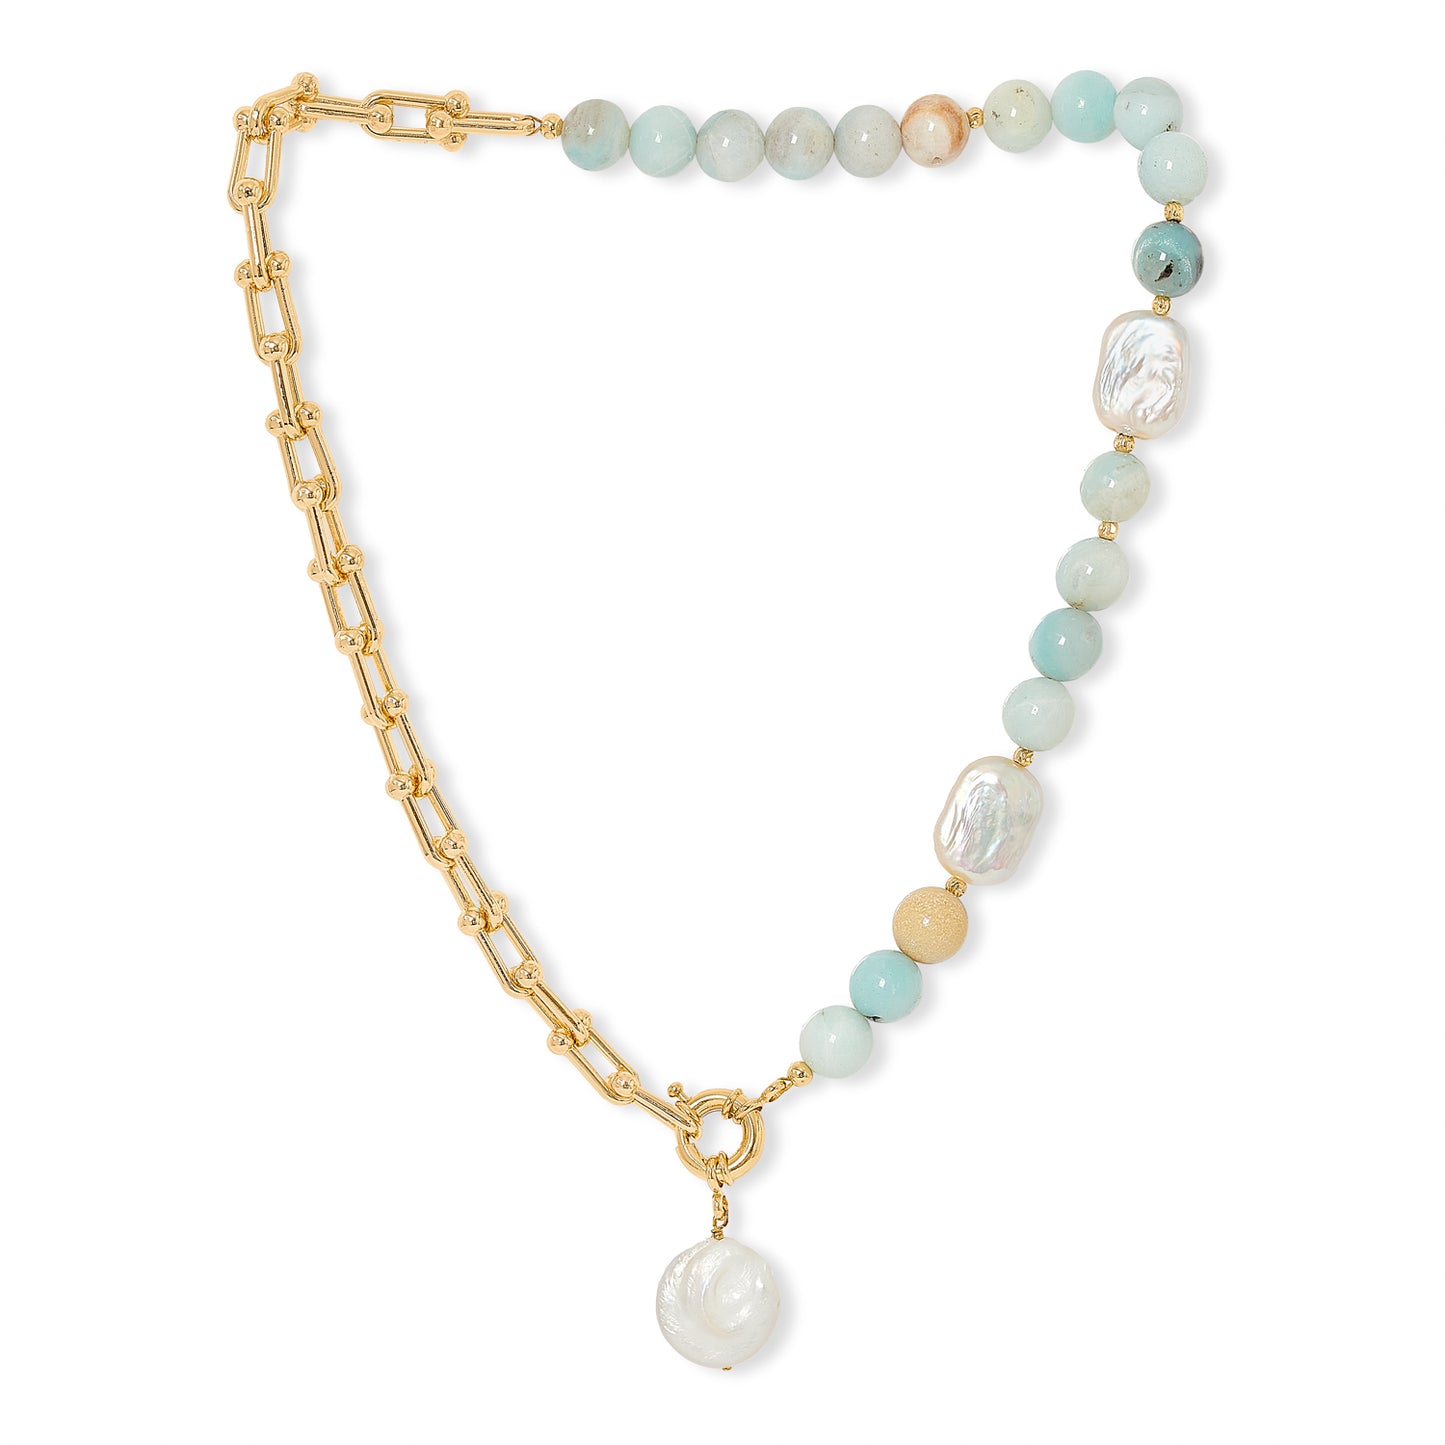 Clara chunky gold chain & amazonite necklace with cultured freshwater pearl drop